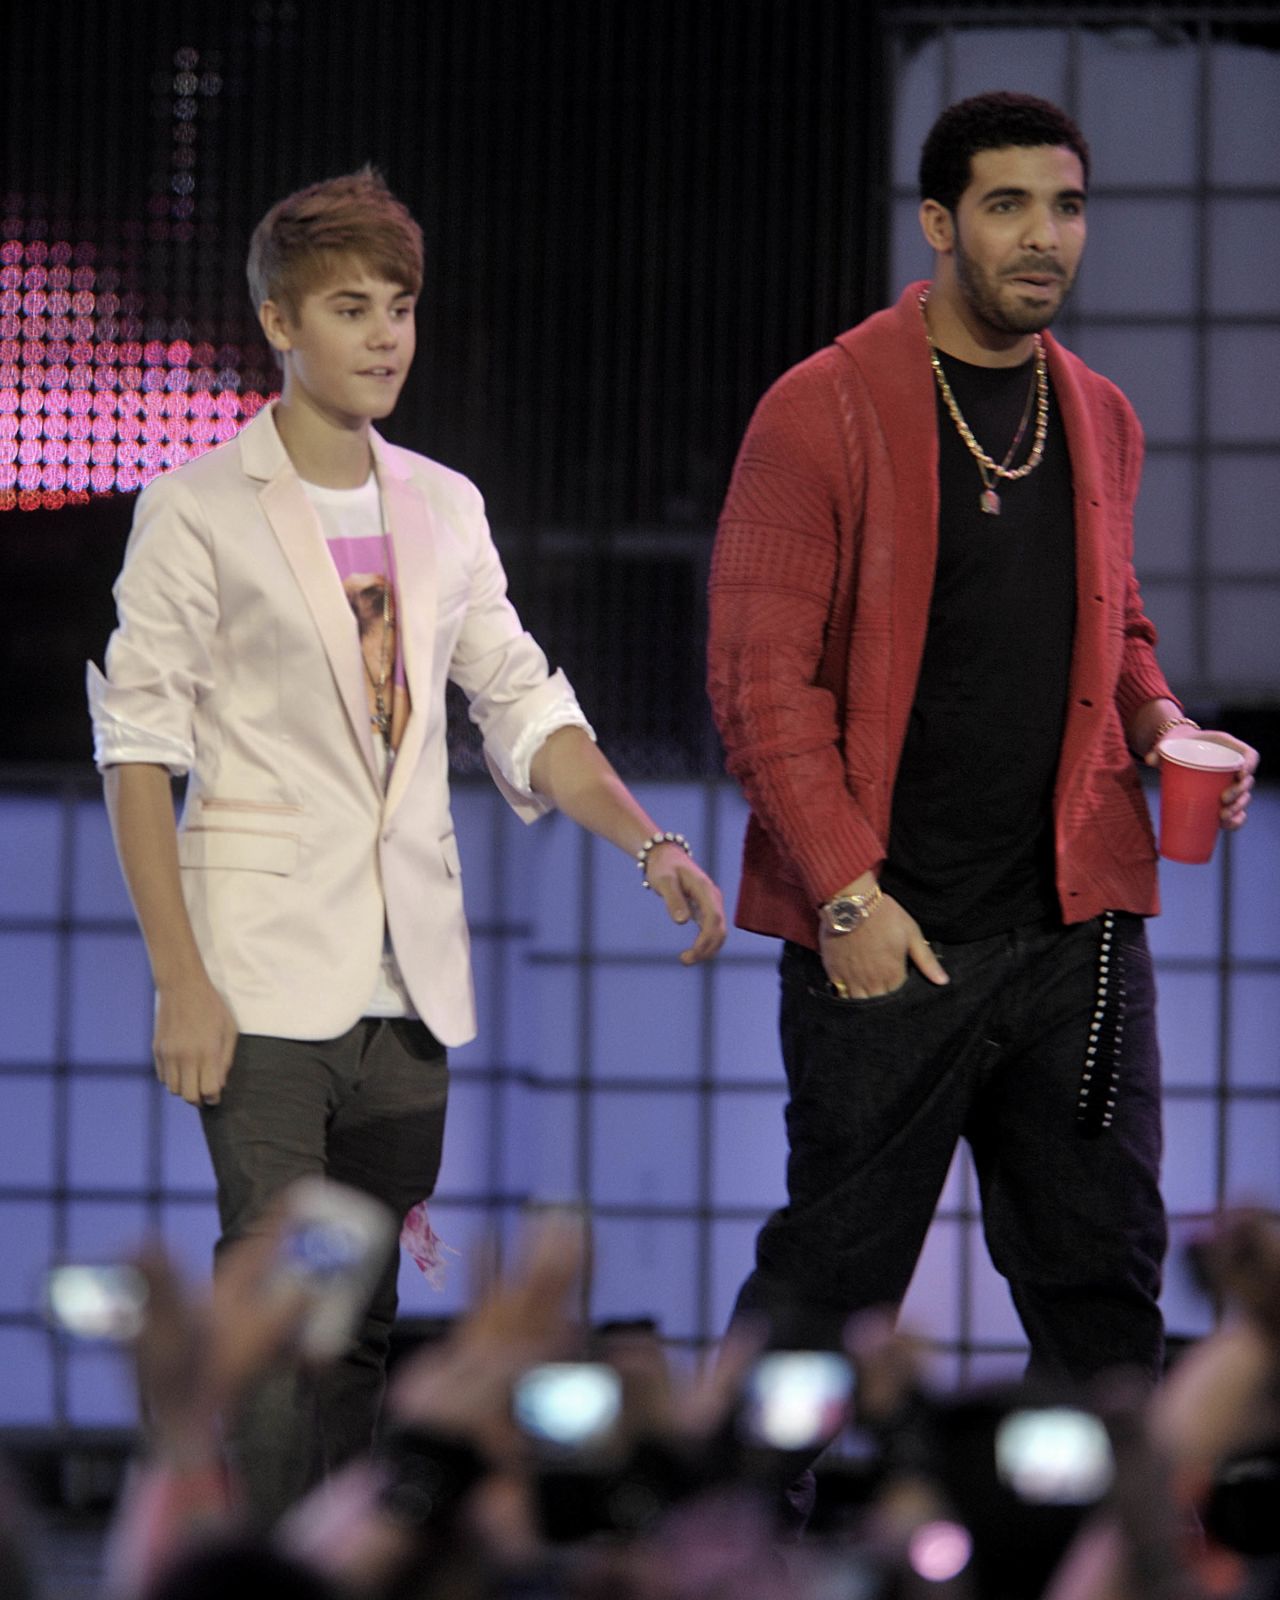 Drake, seen here with Bieber in 2011, is another star who's taken the young singer under his wing. According to Braun, Drake is one of the first people to rip into Bieber after spotting a tawdry headline about him in the news. "He'll text me, like, 'What the hell is going with this? I'm pissed. I'm calling him right now. I'm about to go in on him,' " <a href="http://www.hollywoodreporter.com/news/justin-bieber-reveals-will-smith-657535" target="_blank" target="_blank">Braun told THR</a> in 2013.